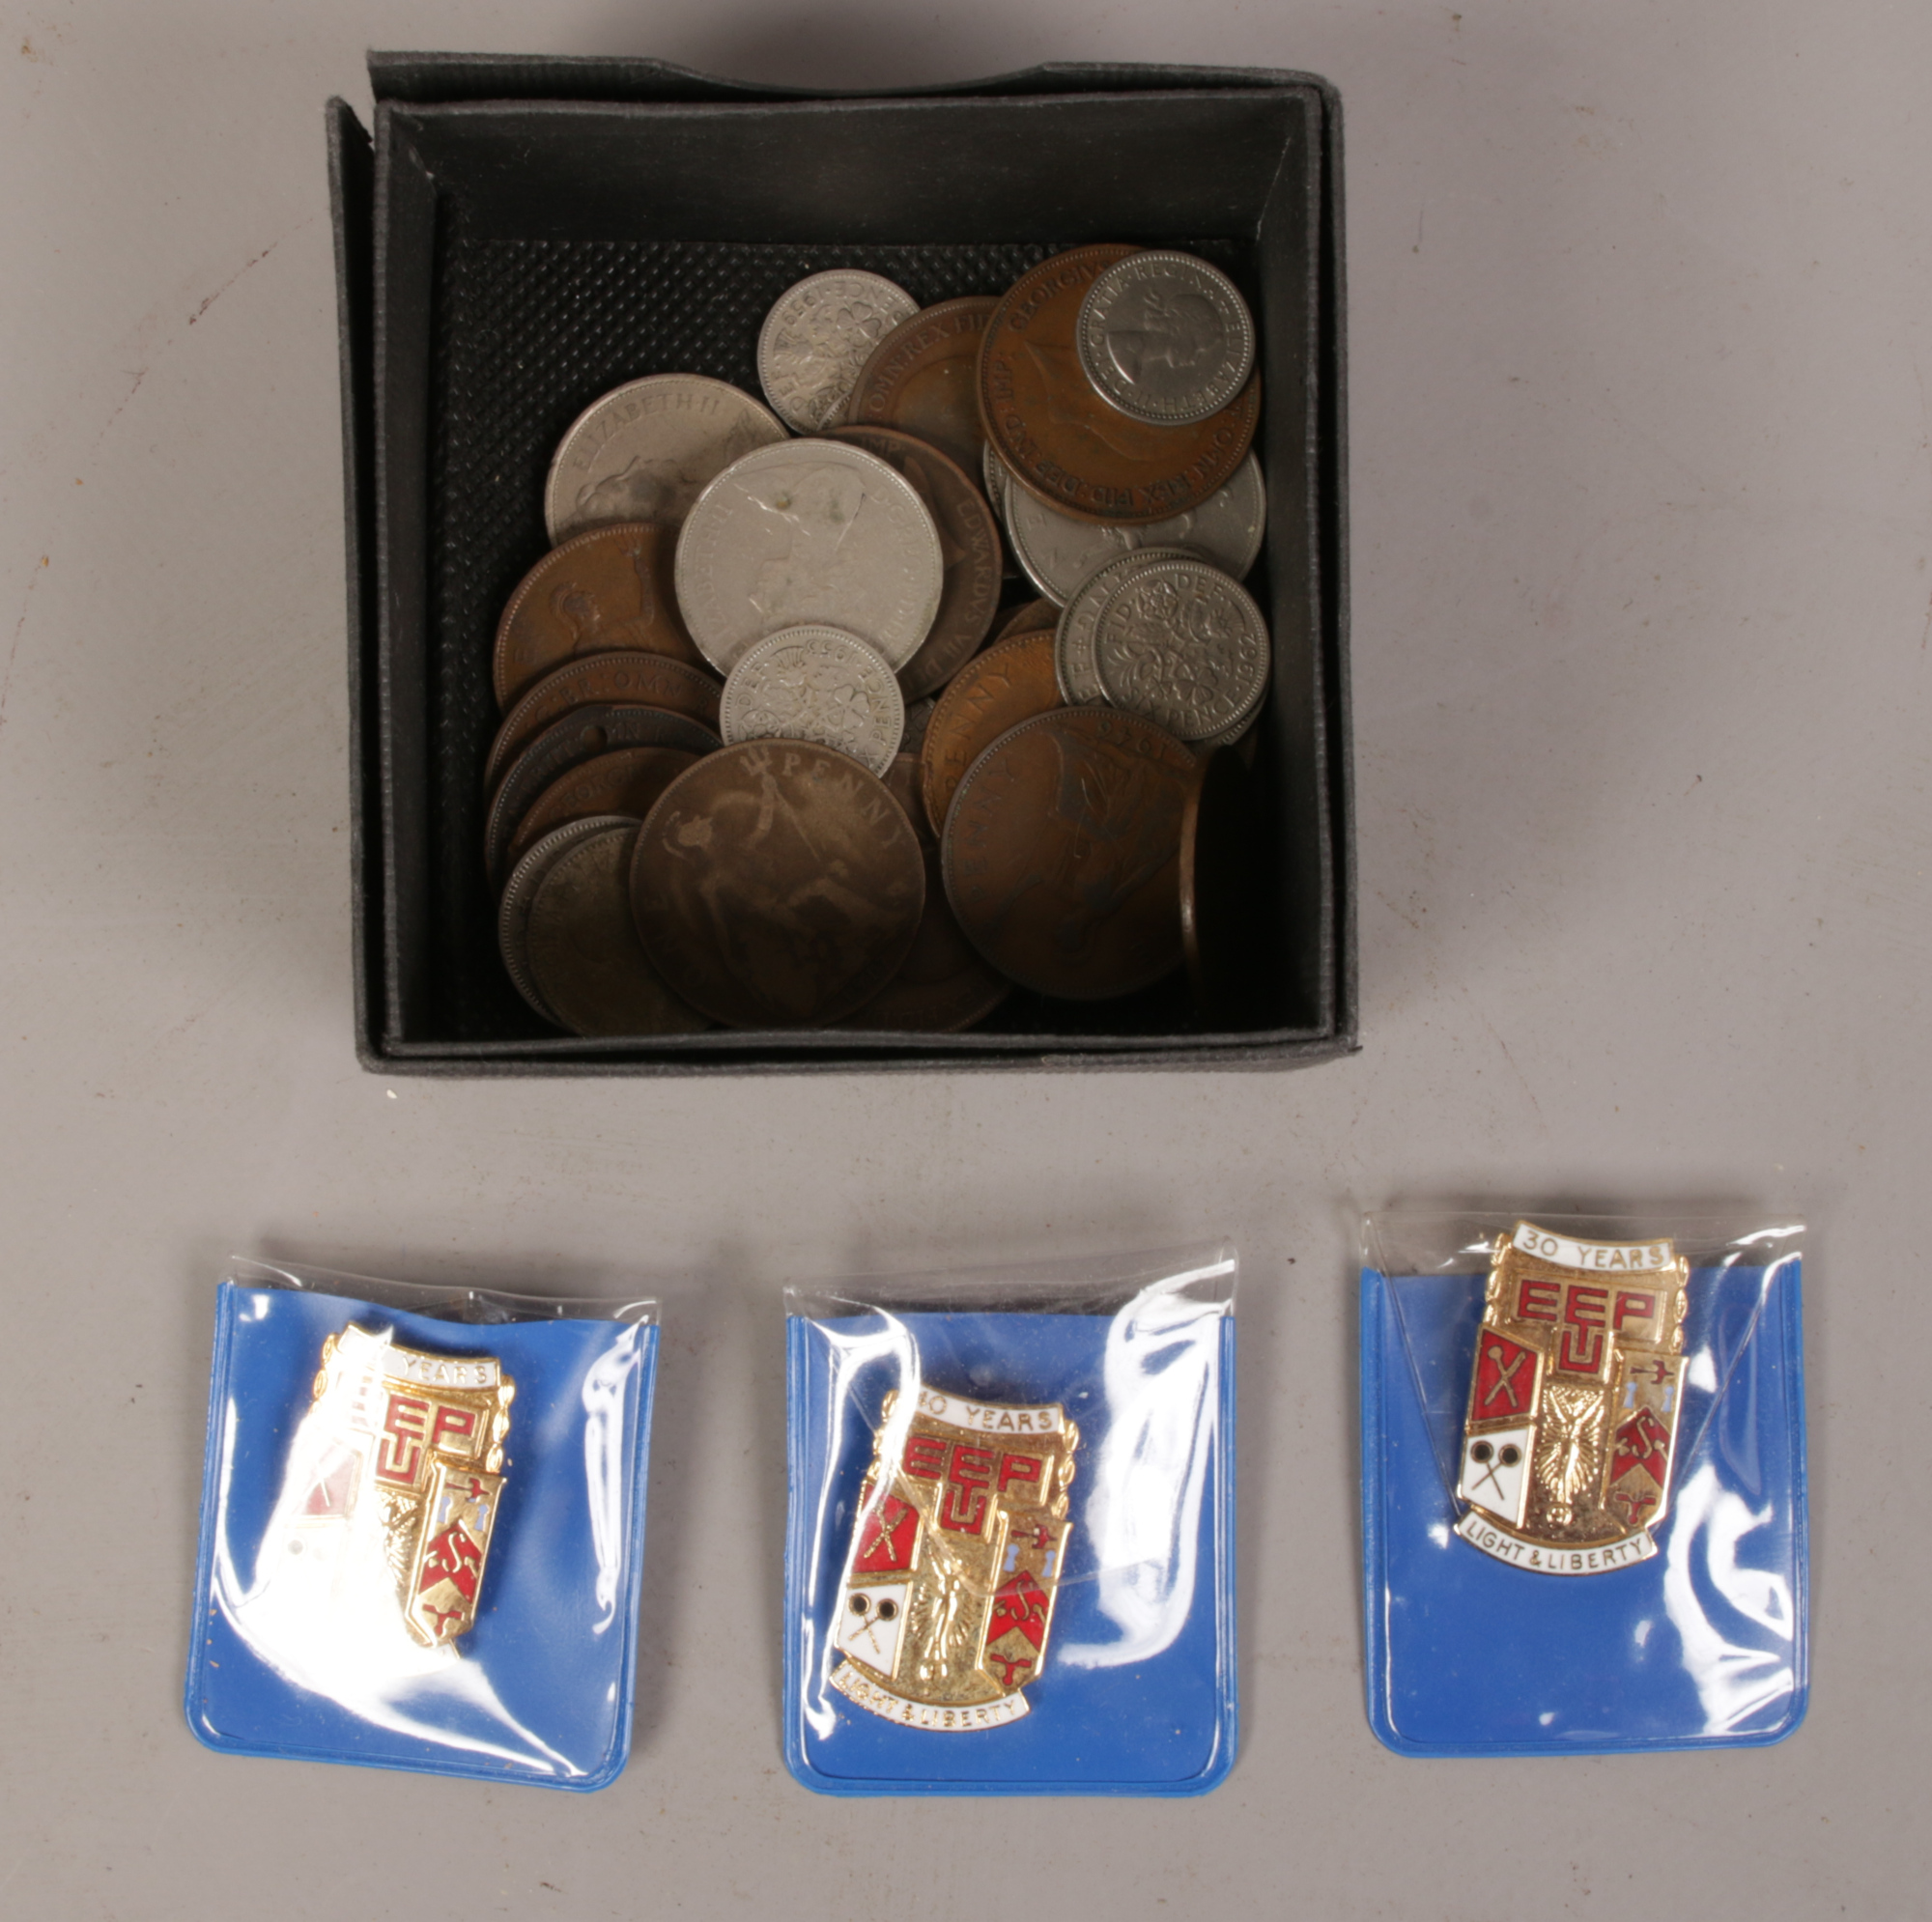 A small collection of British copper and silver coins, along with three EETPU Union badges.